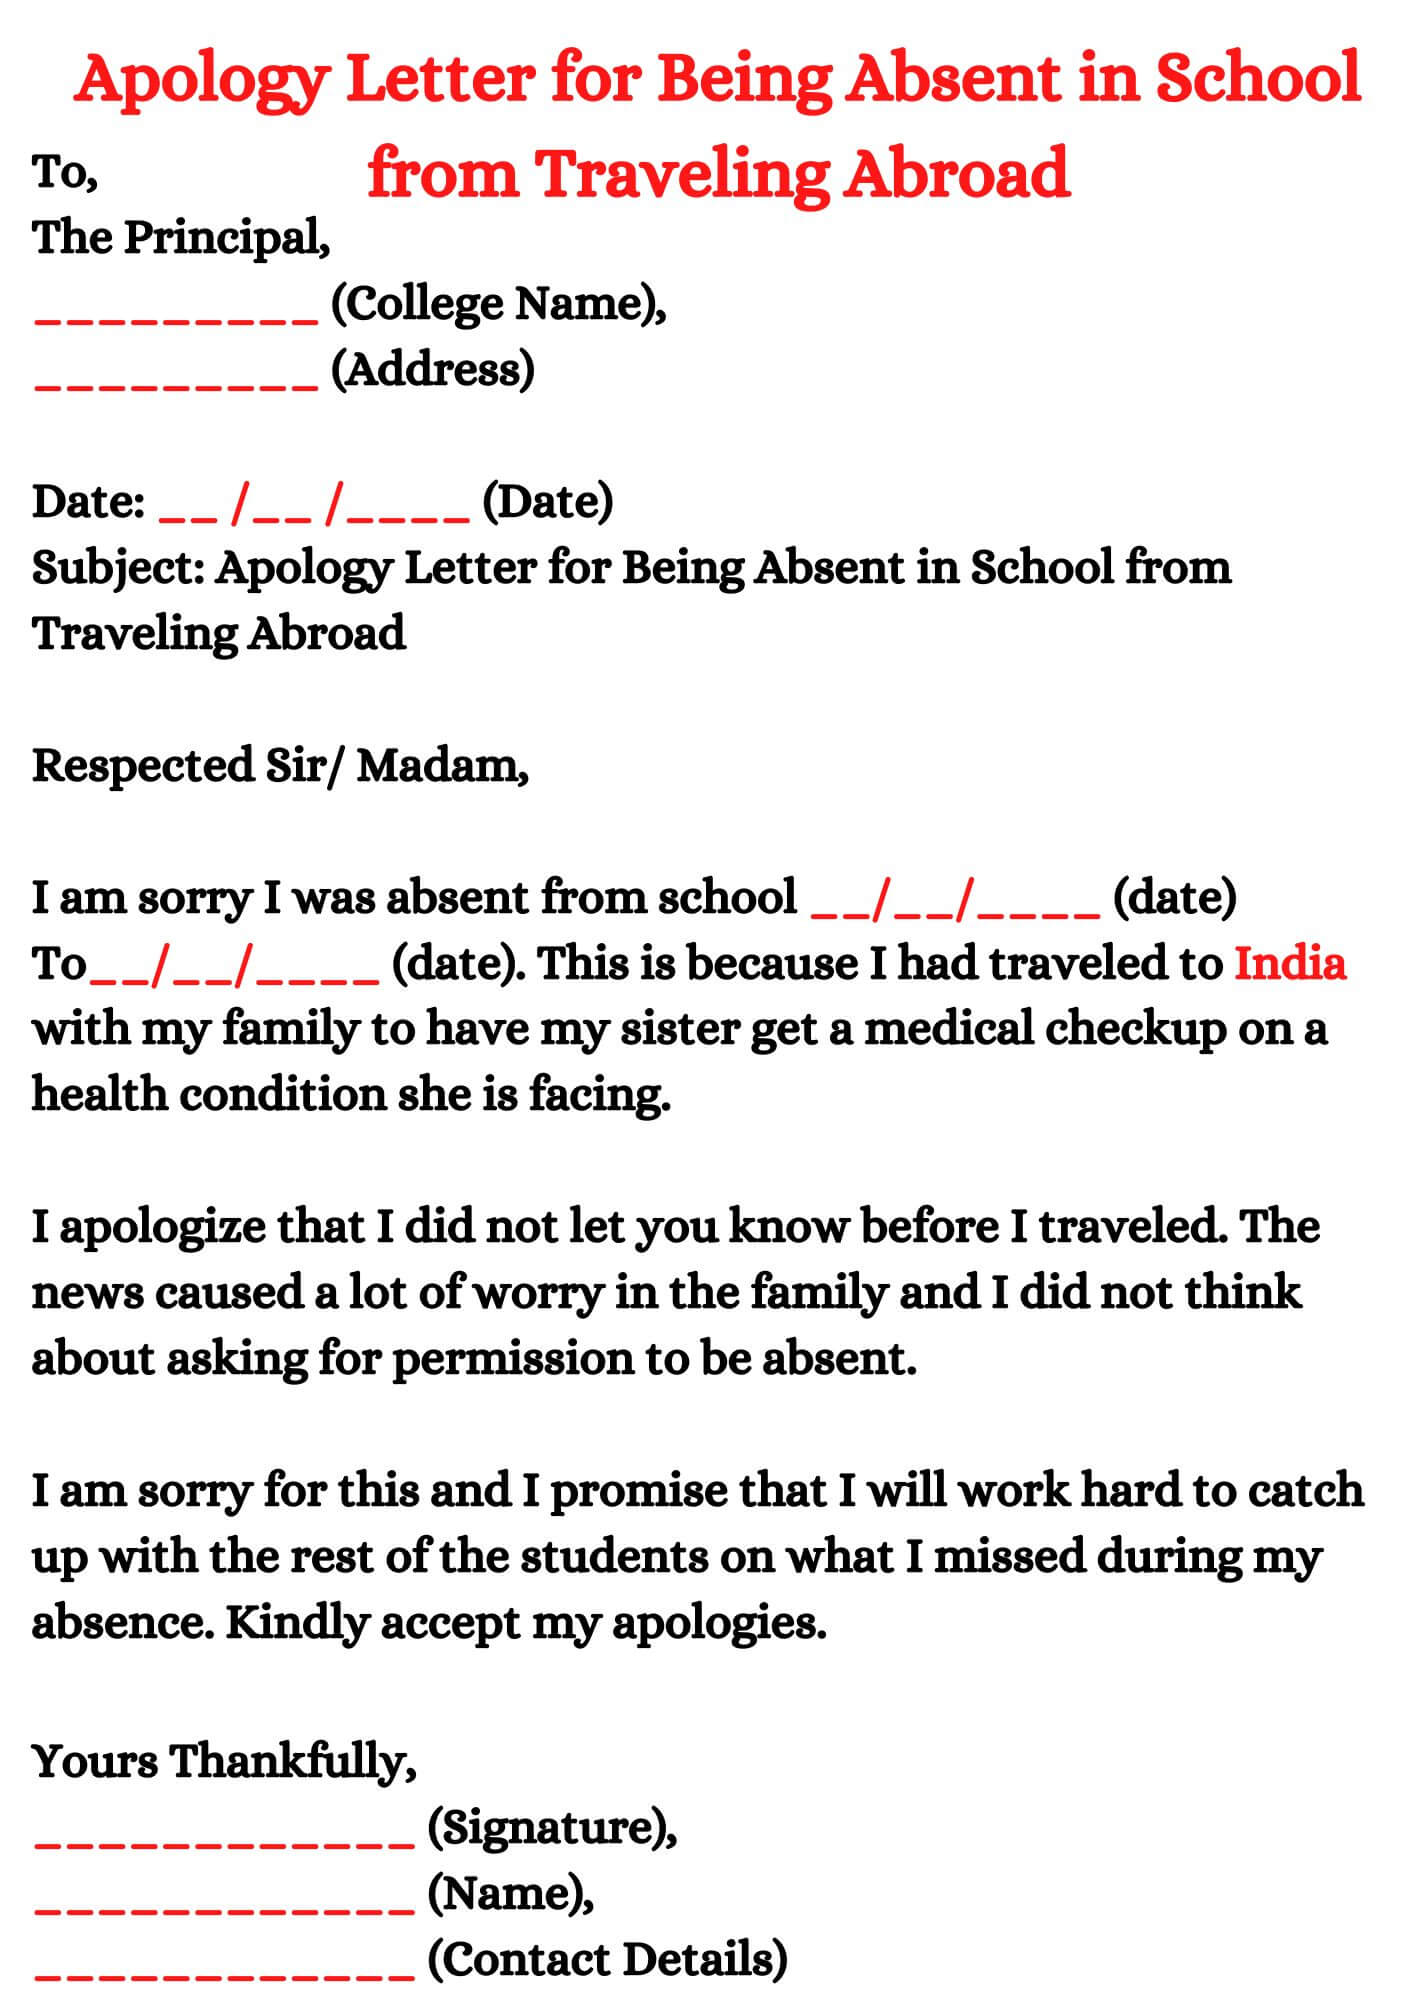 Apology Letter for Being Absent in School from Traveling Abroad